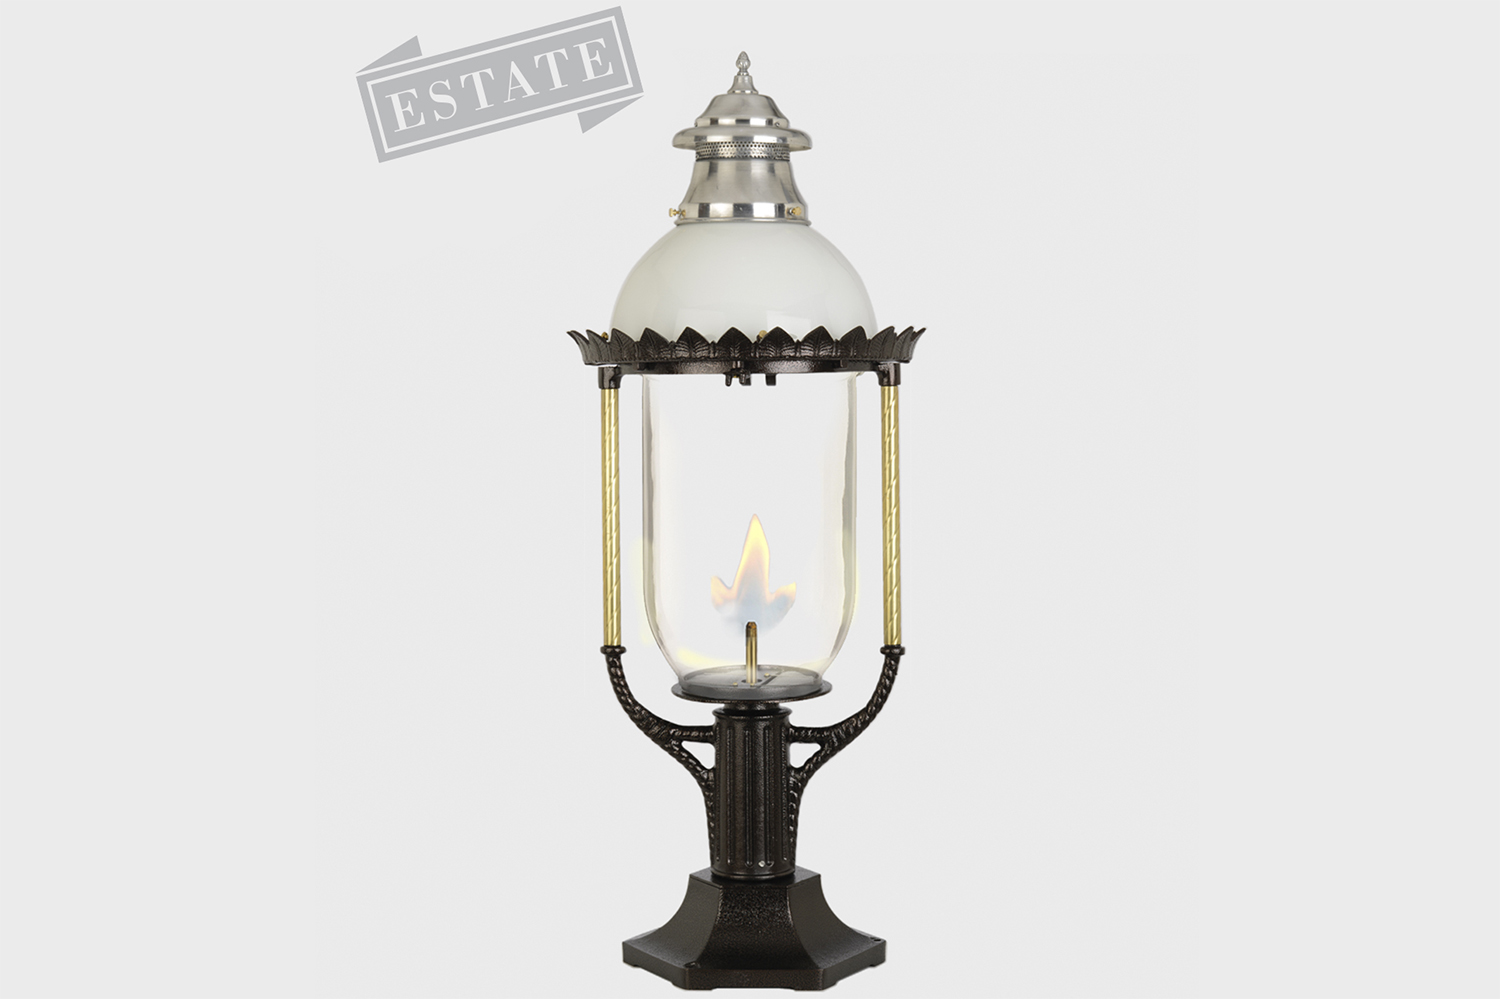 Boulevard Gas Light open flame antique from american gas lamps